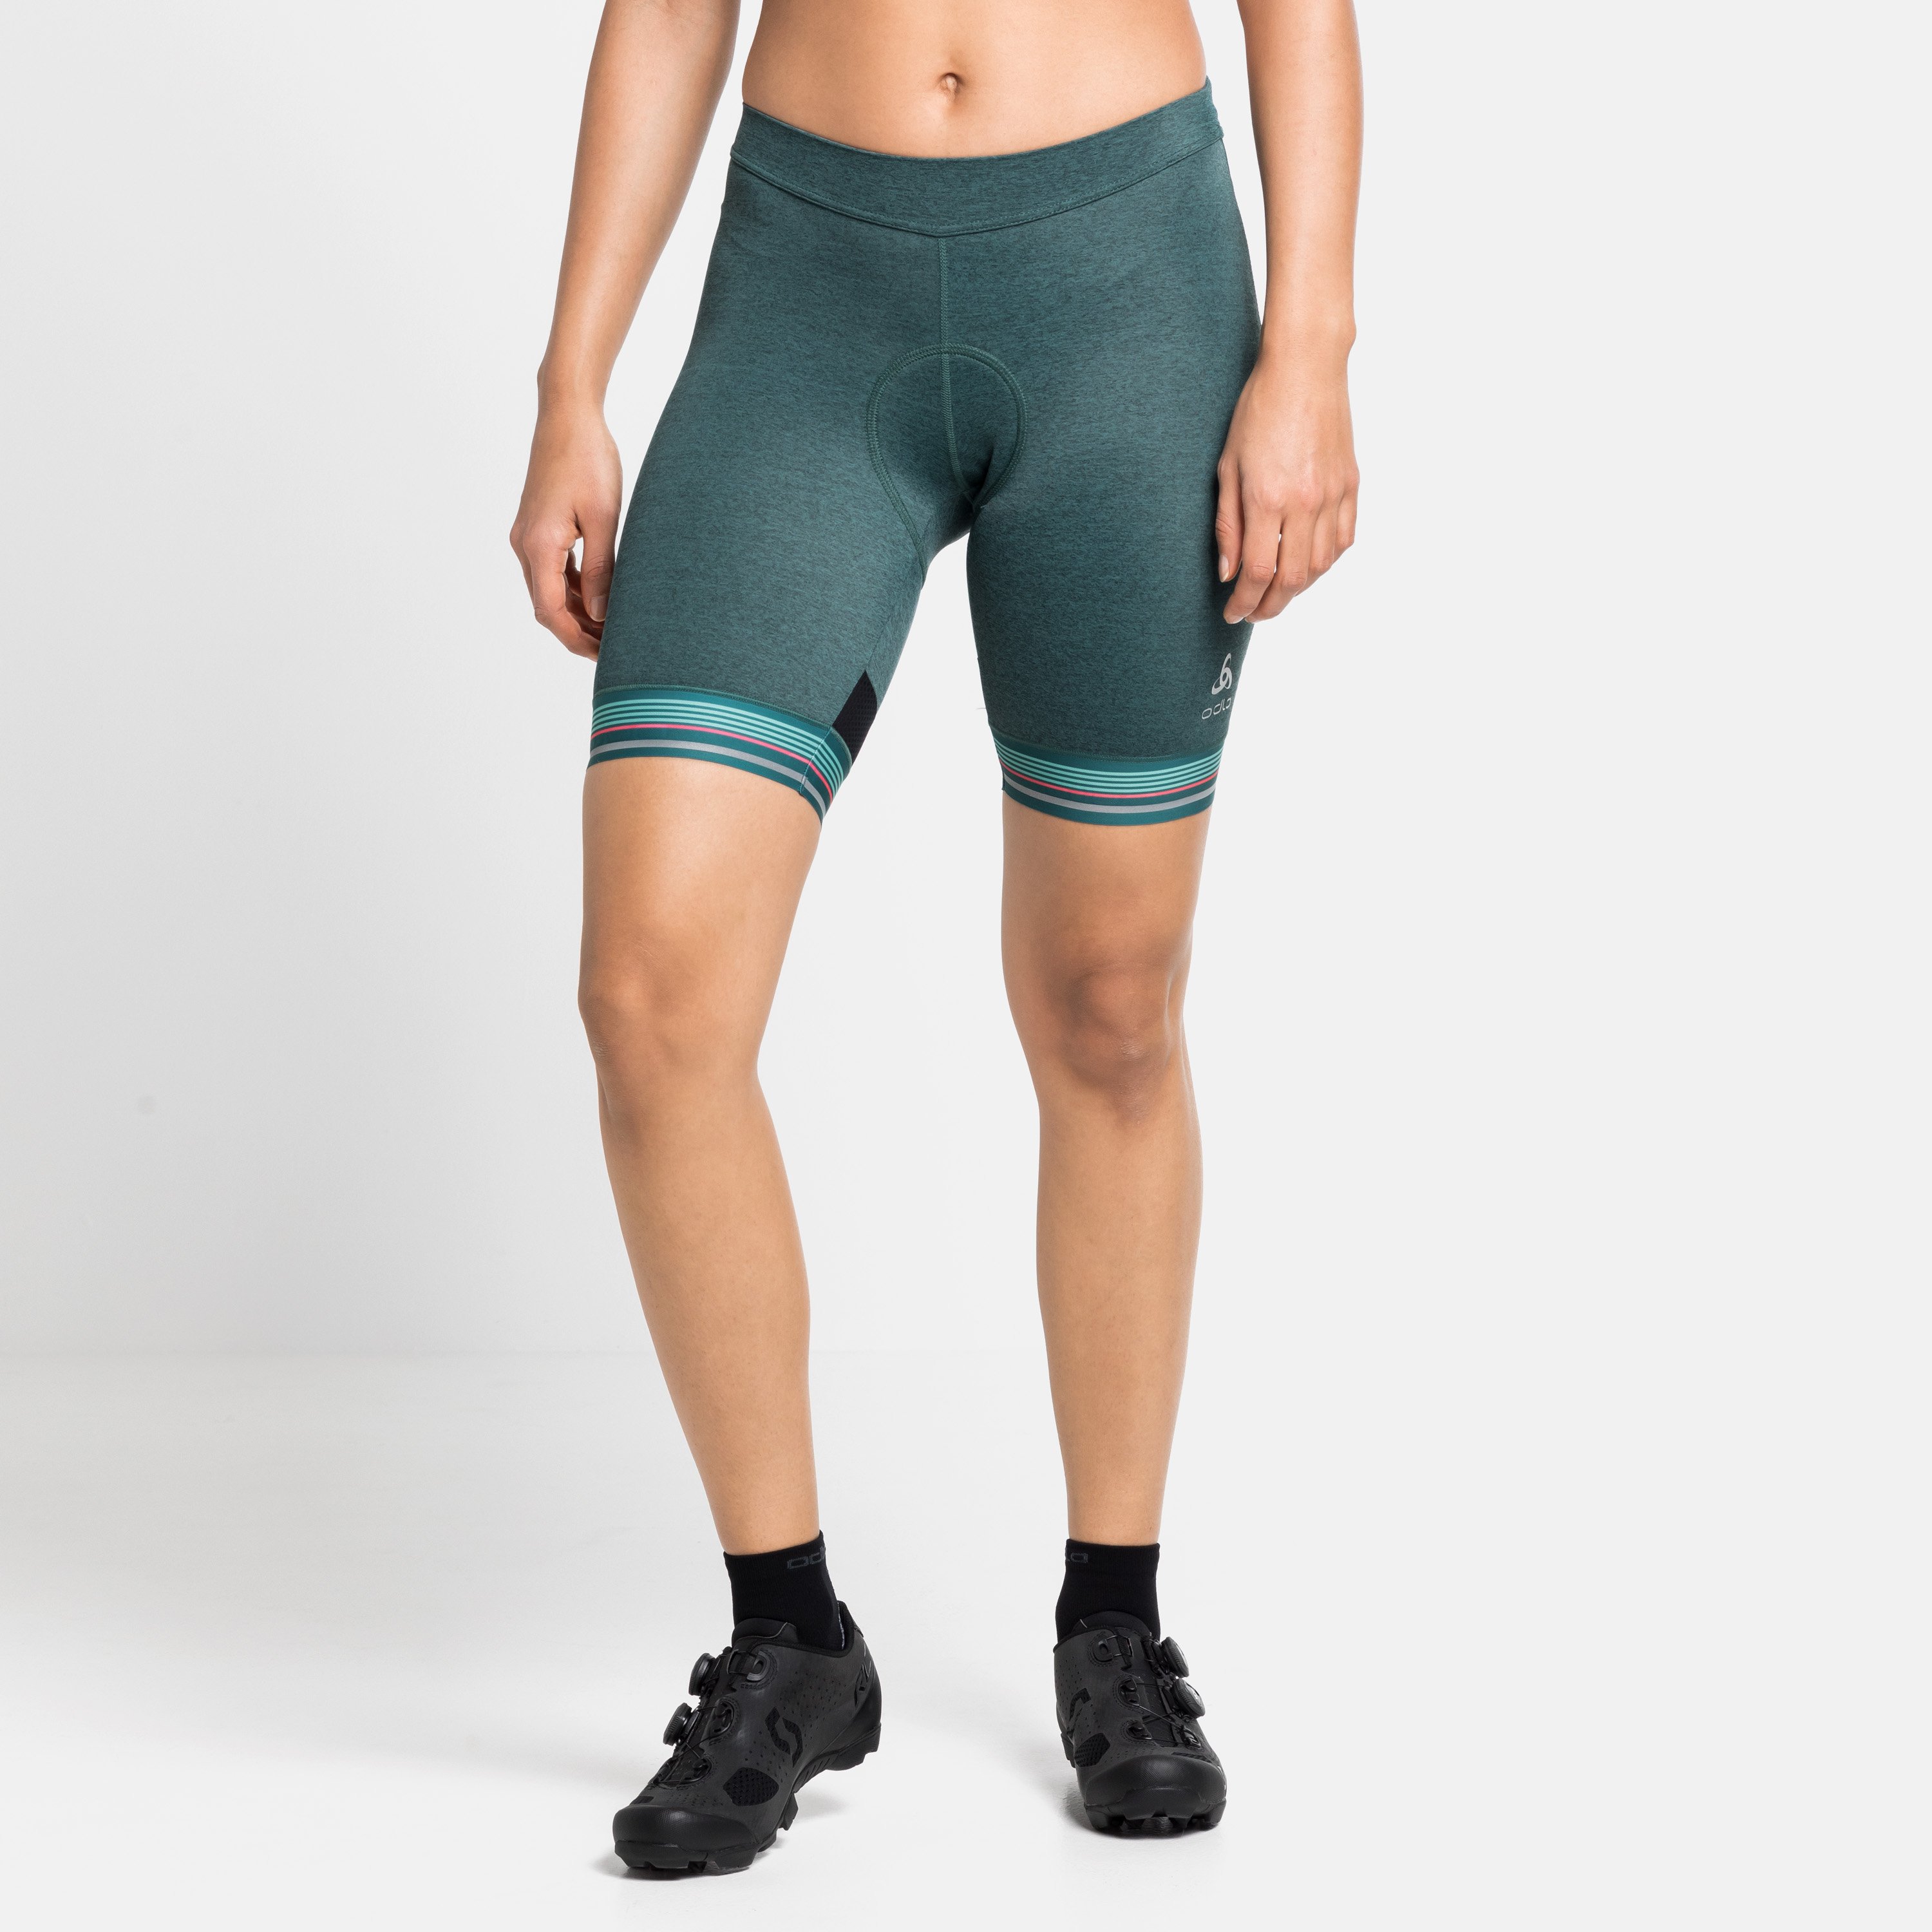 Collant Cycle ZEROWEIGHT pour femme